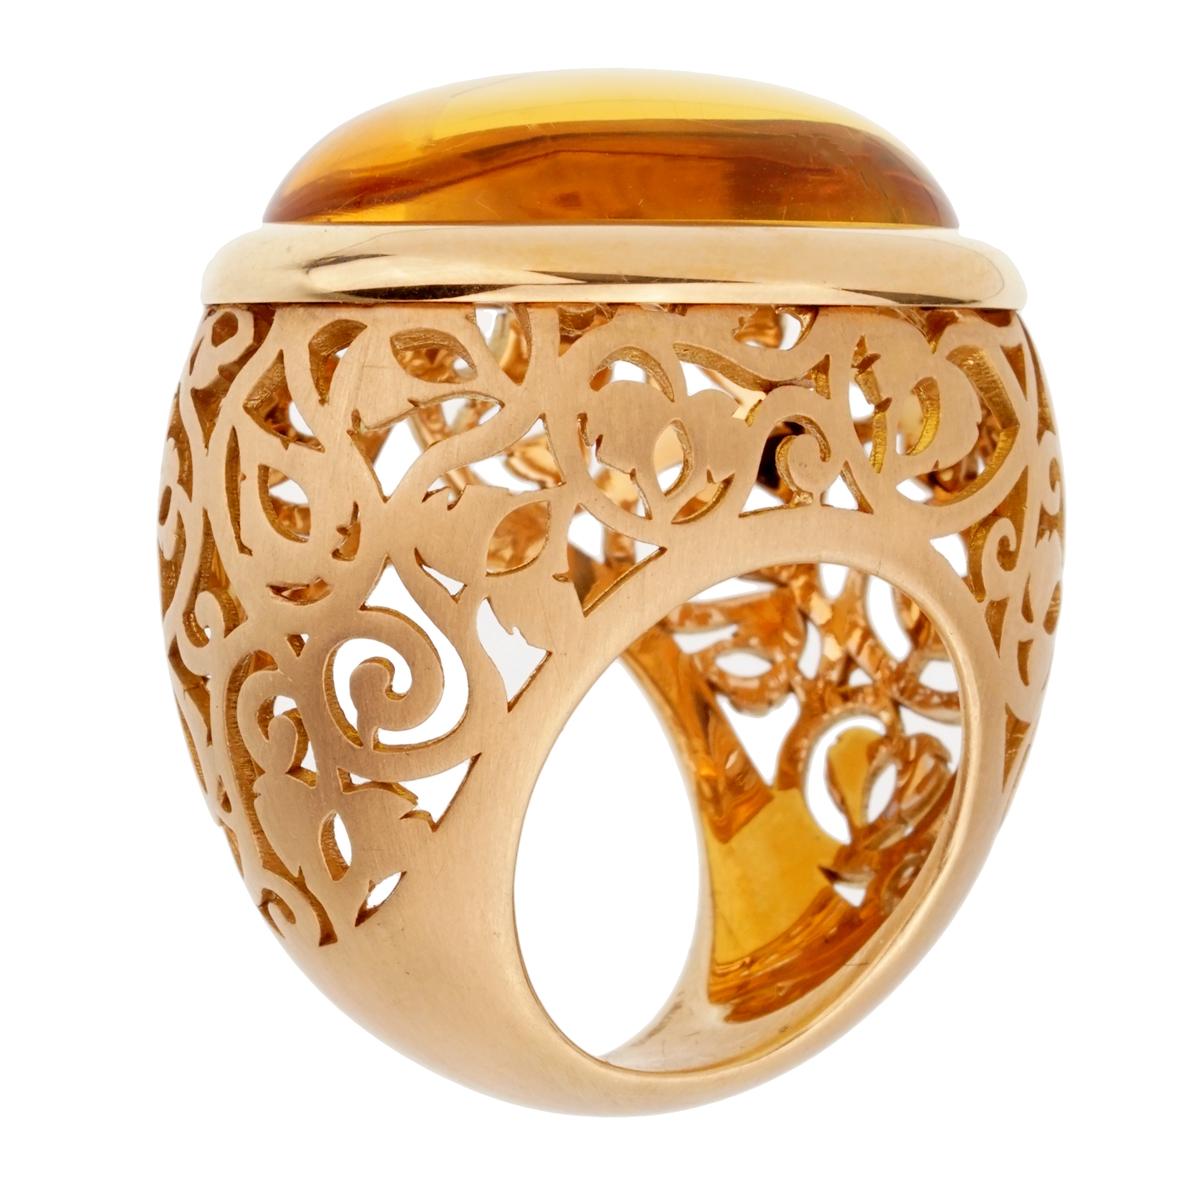 A magnificent brand new Pomellato rose gold cocktail ring showcasing a 19.94ct cabochon Amber. The ring measures a size 5 and can be resized.

Pomellato Retail Price: $7,800
Sku: 2318